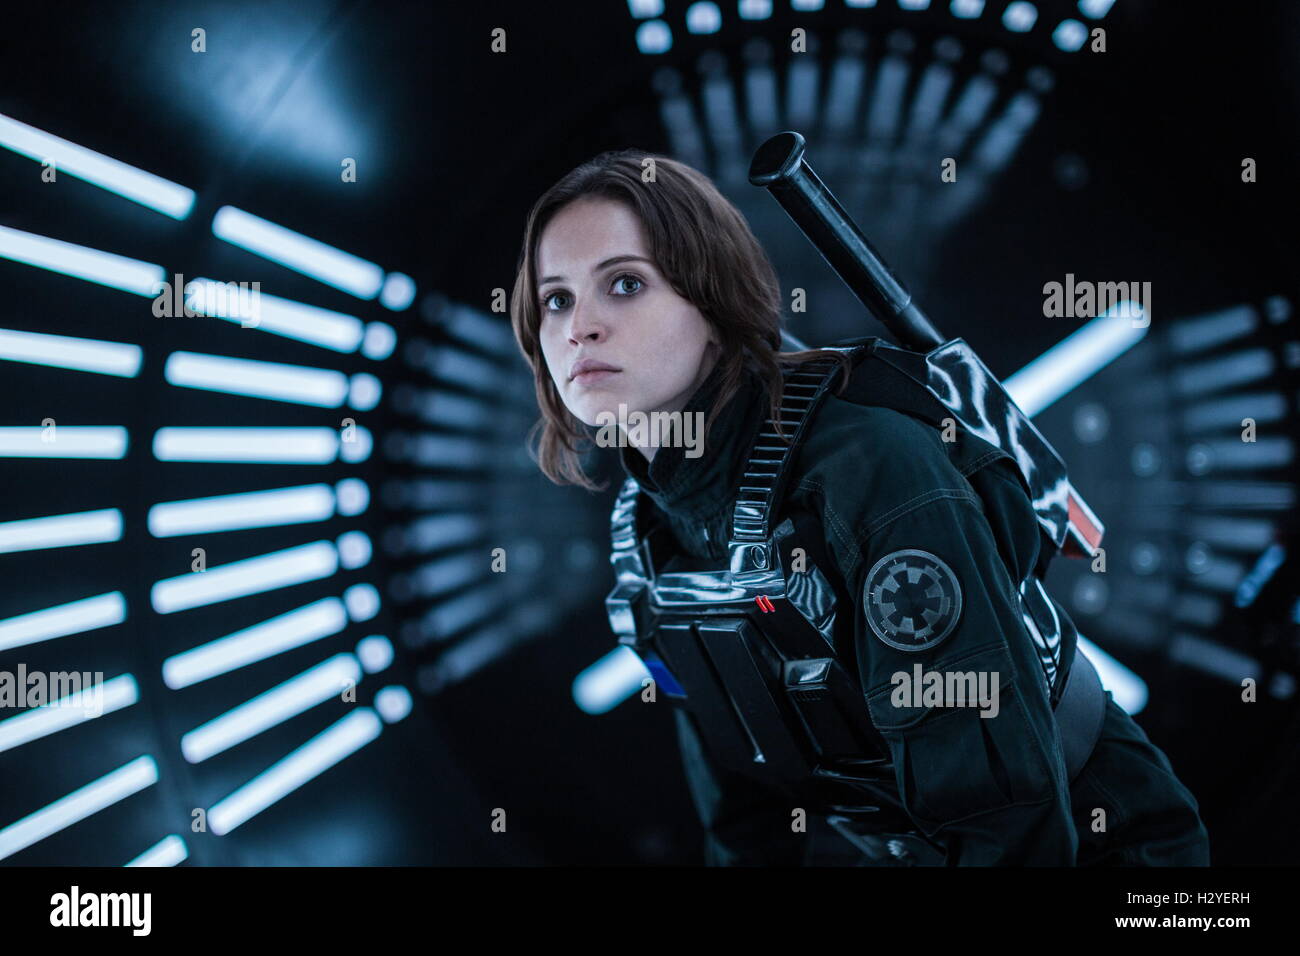 RELEASE DATE: December 16, 2016 TITLE: Rogue One: Rogue One aka A Star Wars Story STUDIO: Lucasfilm DIRECTOR: Gareth Edwards PLOT: Rebels set out on a mission to steal the plans for the Death Star STARRING: Jyn Erso (Felicity Jones)  (Credit Image: c Lucasfilm/Entertainment Pictures/) Stock Photo